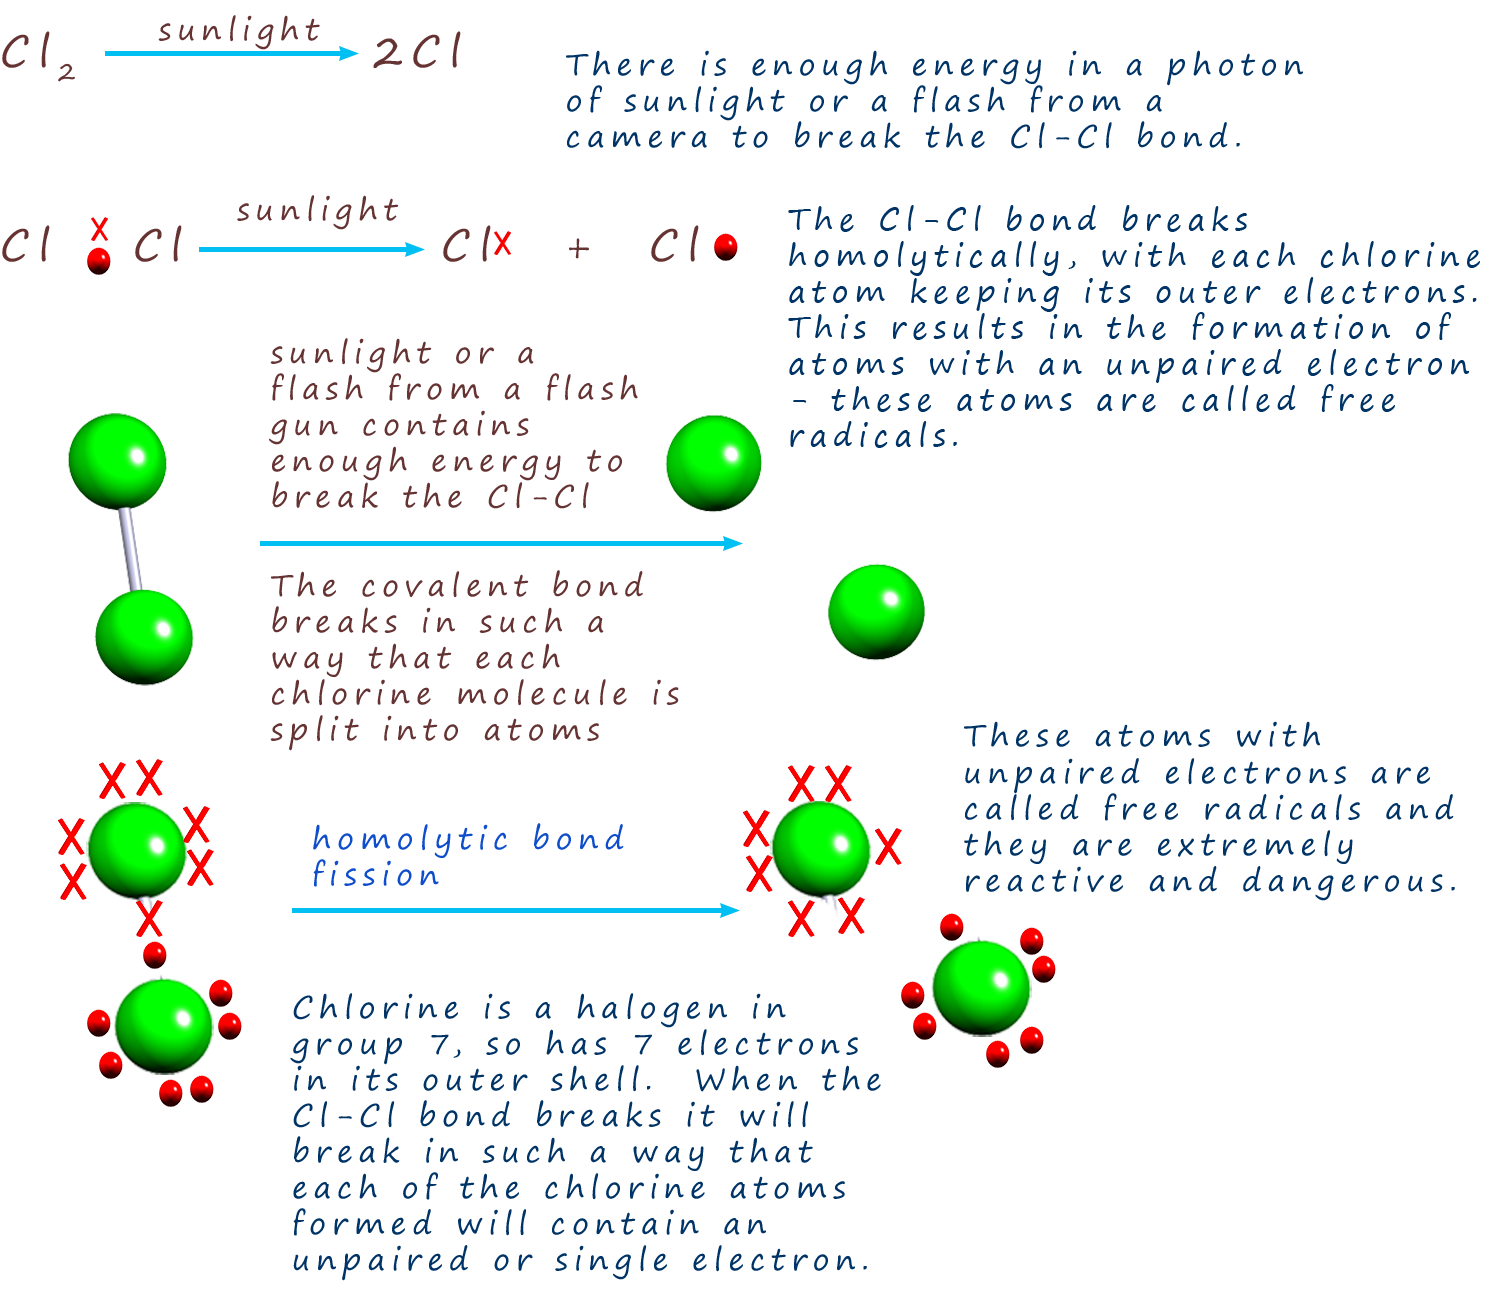 Dot and cross diagrams to show homolytic bond cleavage in a chlorine molecule.  This results in the formation of chlorine free radicals.